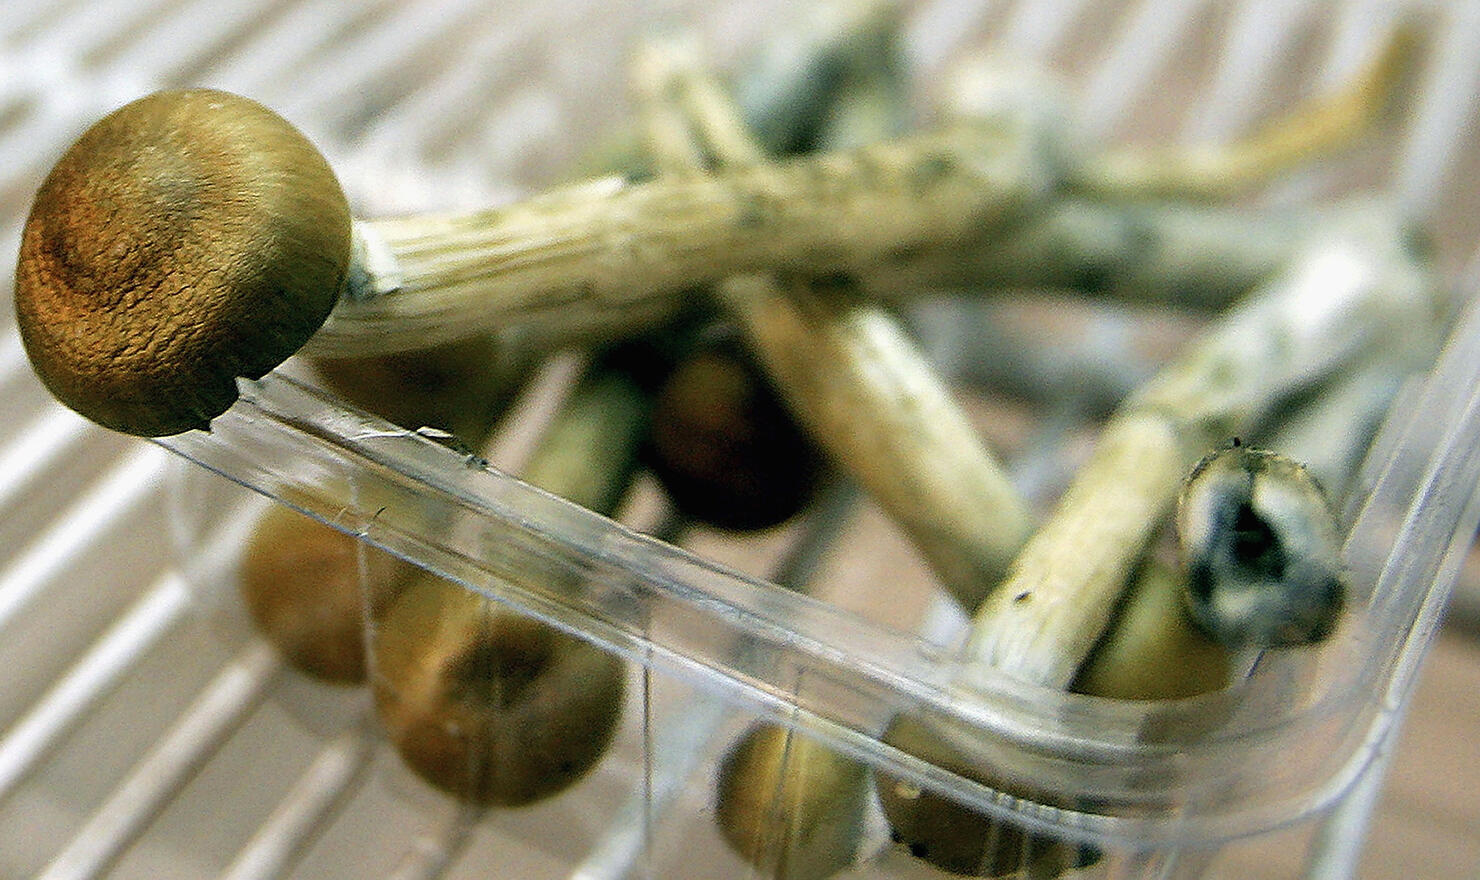 Denver could become first city to decriminalize magic mushrooms